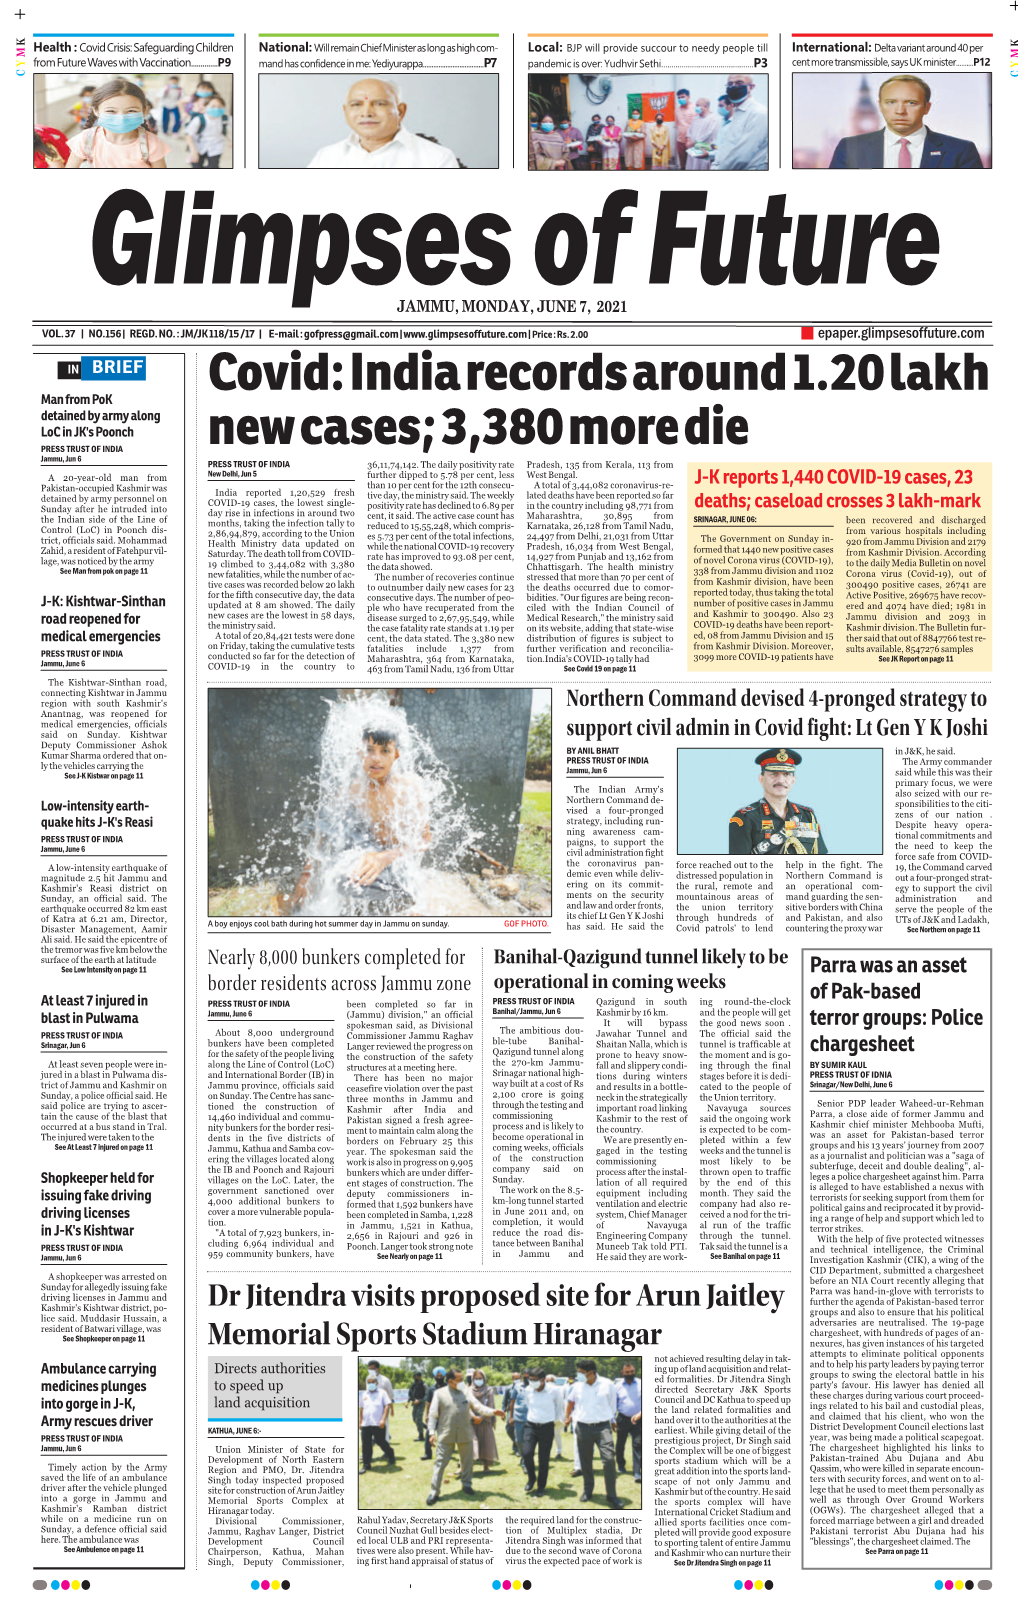 Covid: India Records Around 1.20 Lakh New Cases; 3,380 More